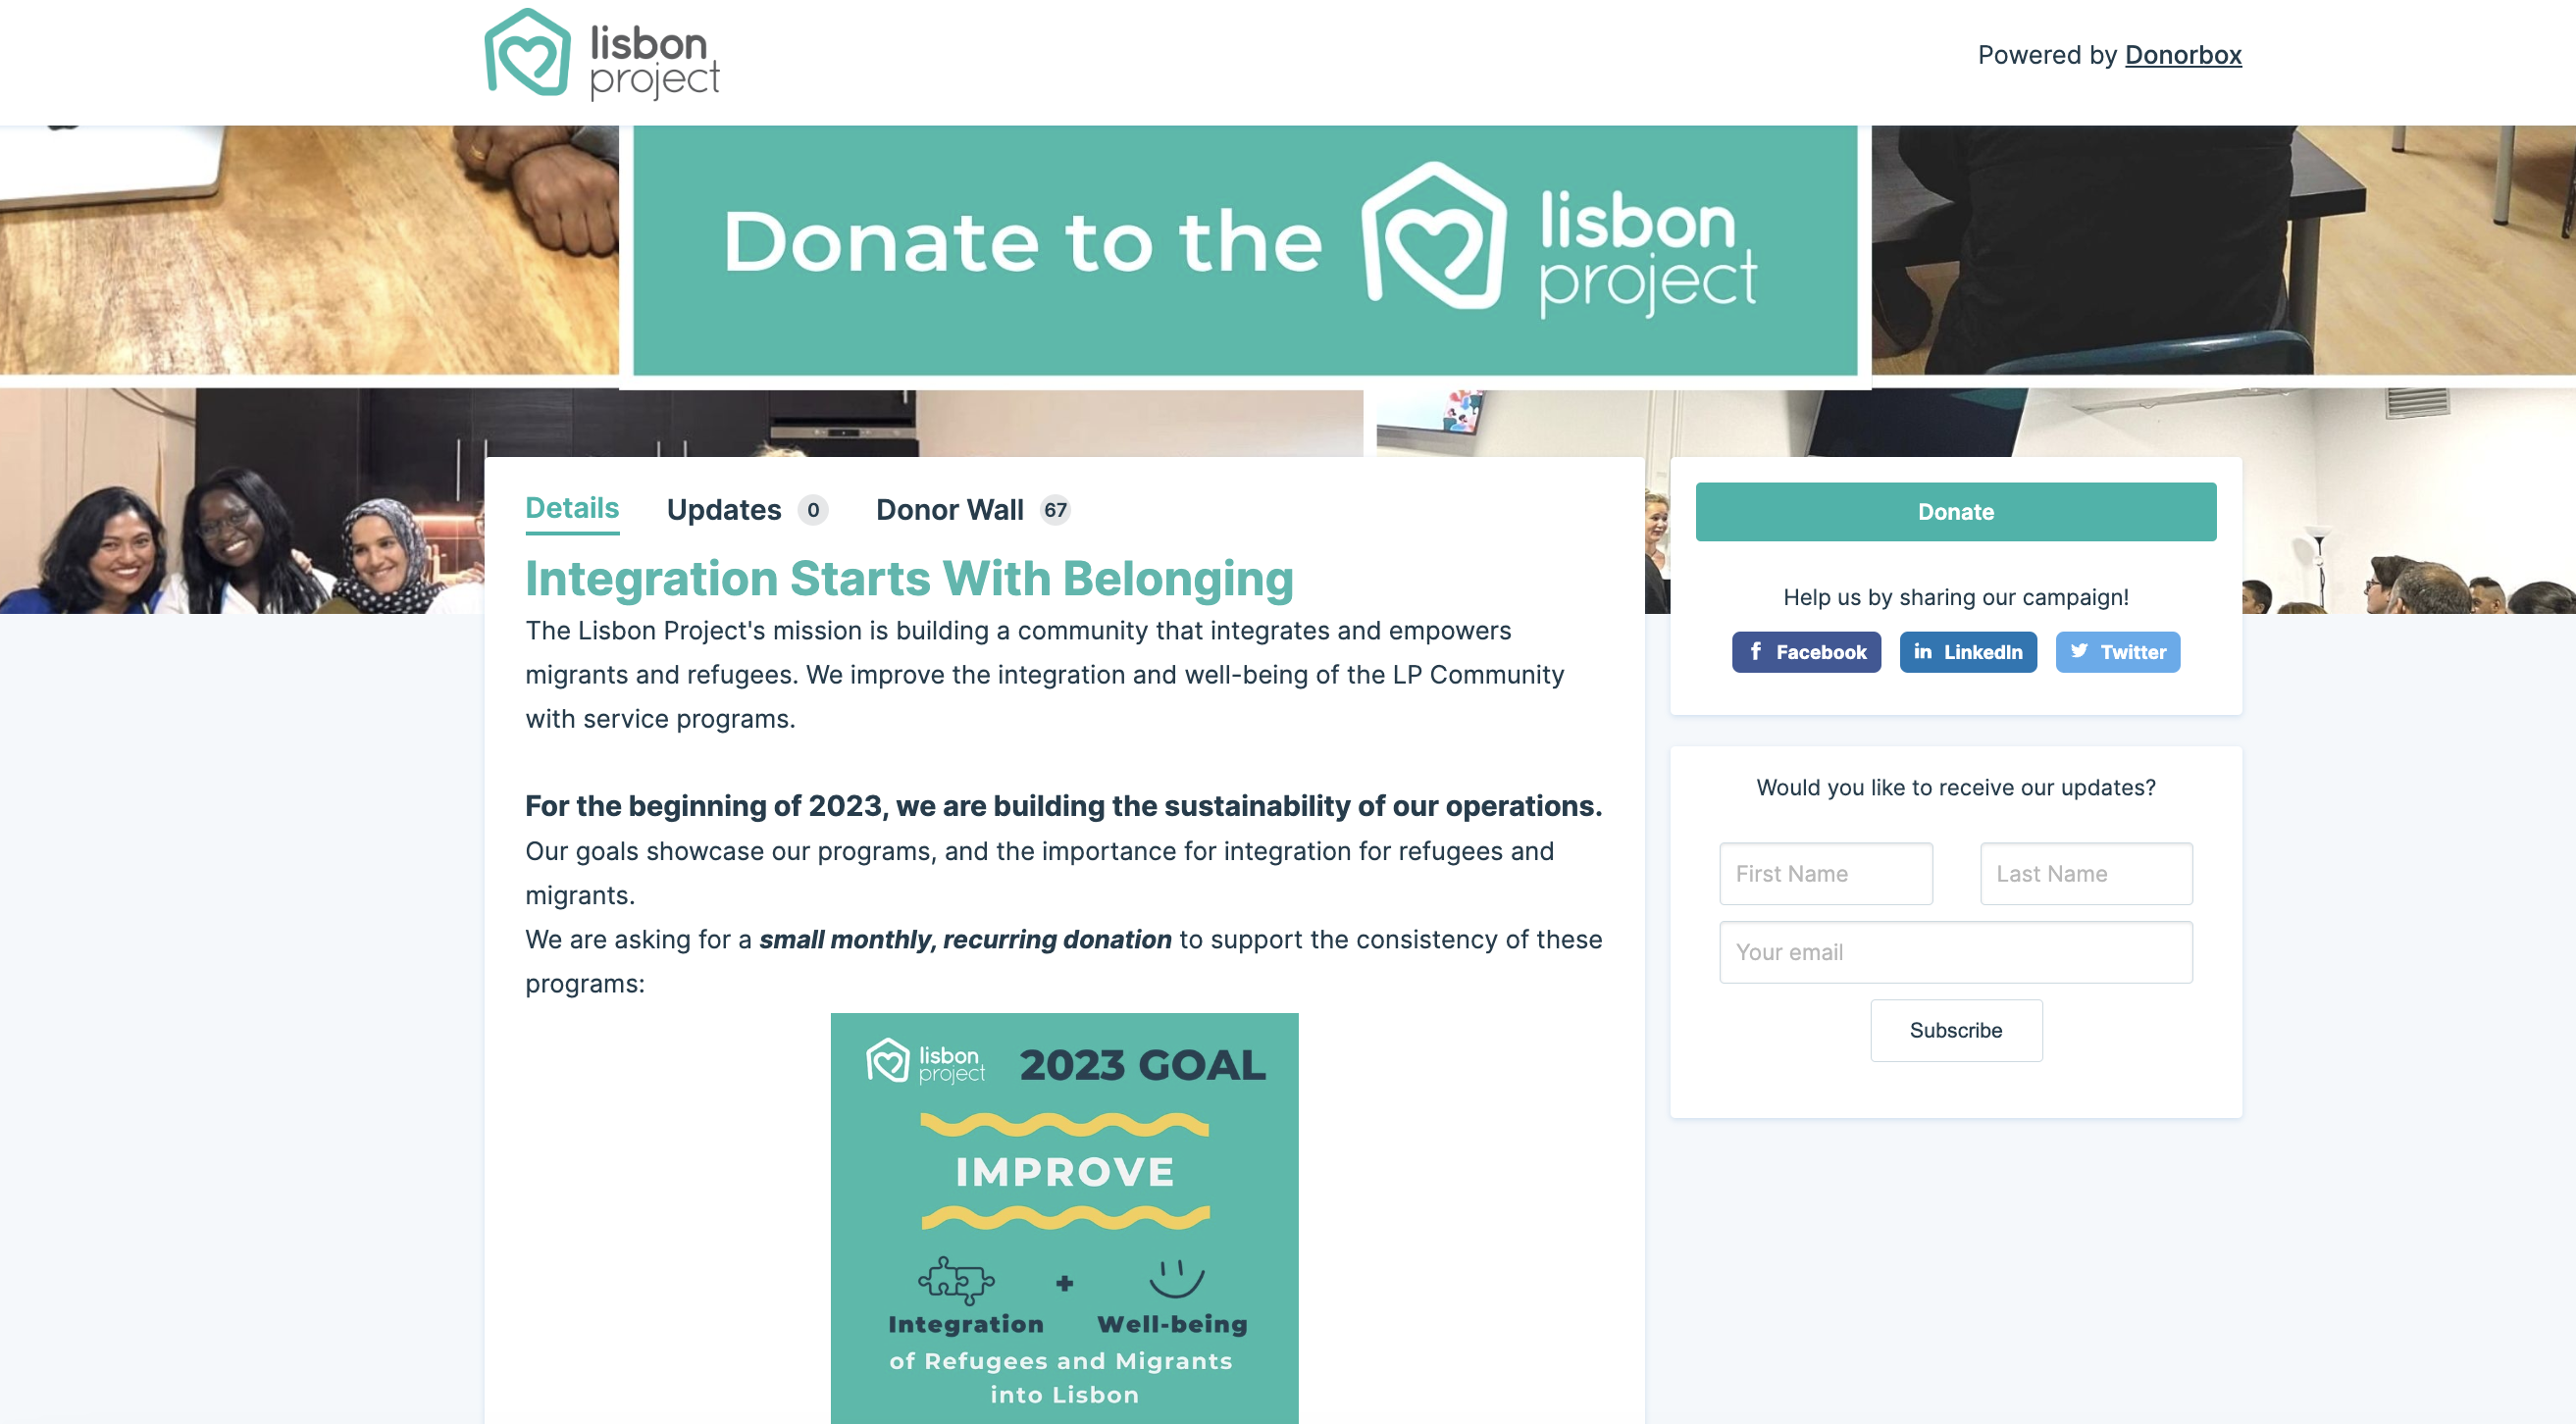 Organization using Donorbox to fundraise for their community service project. 